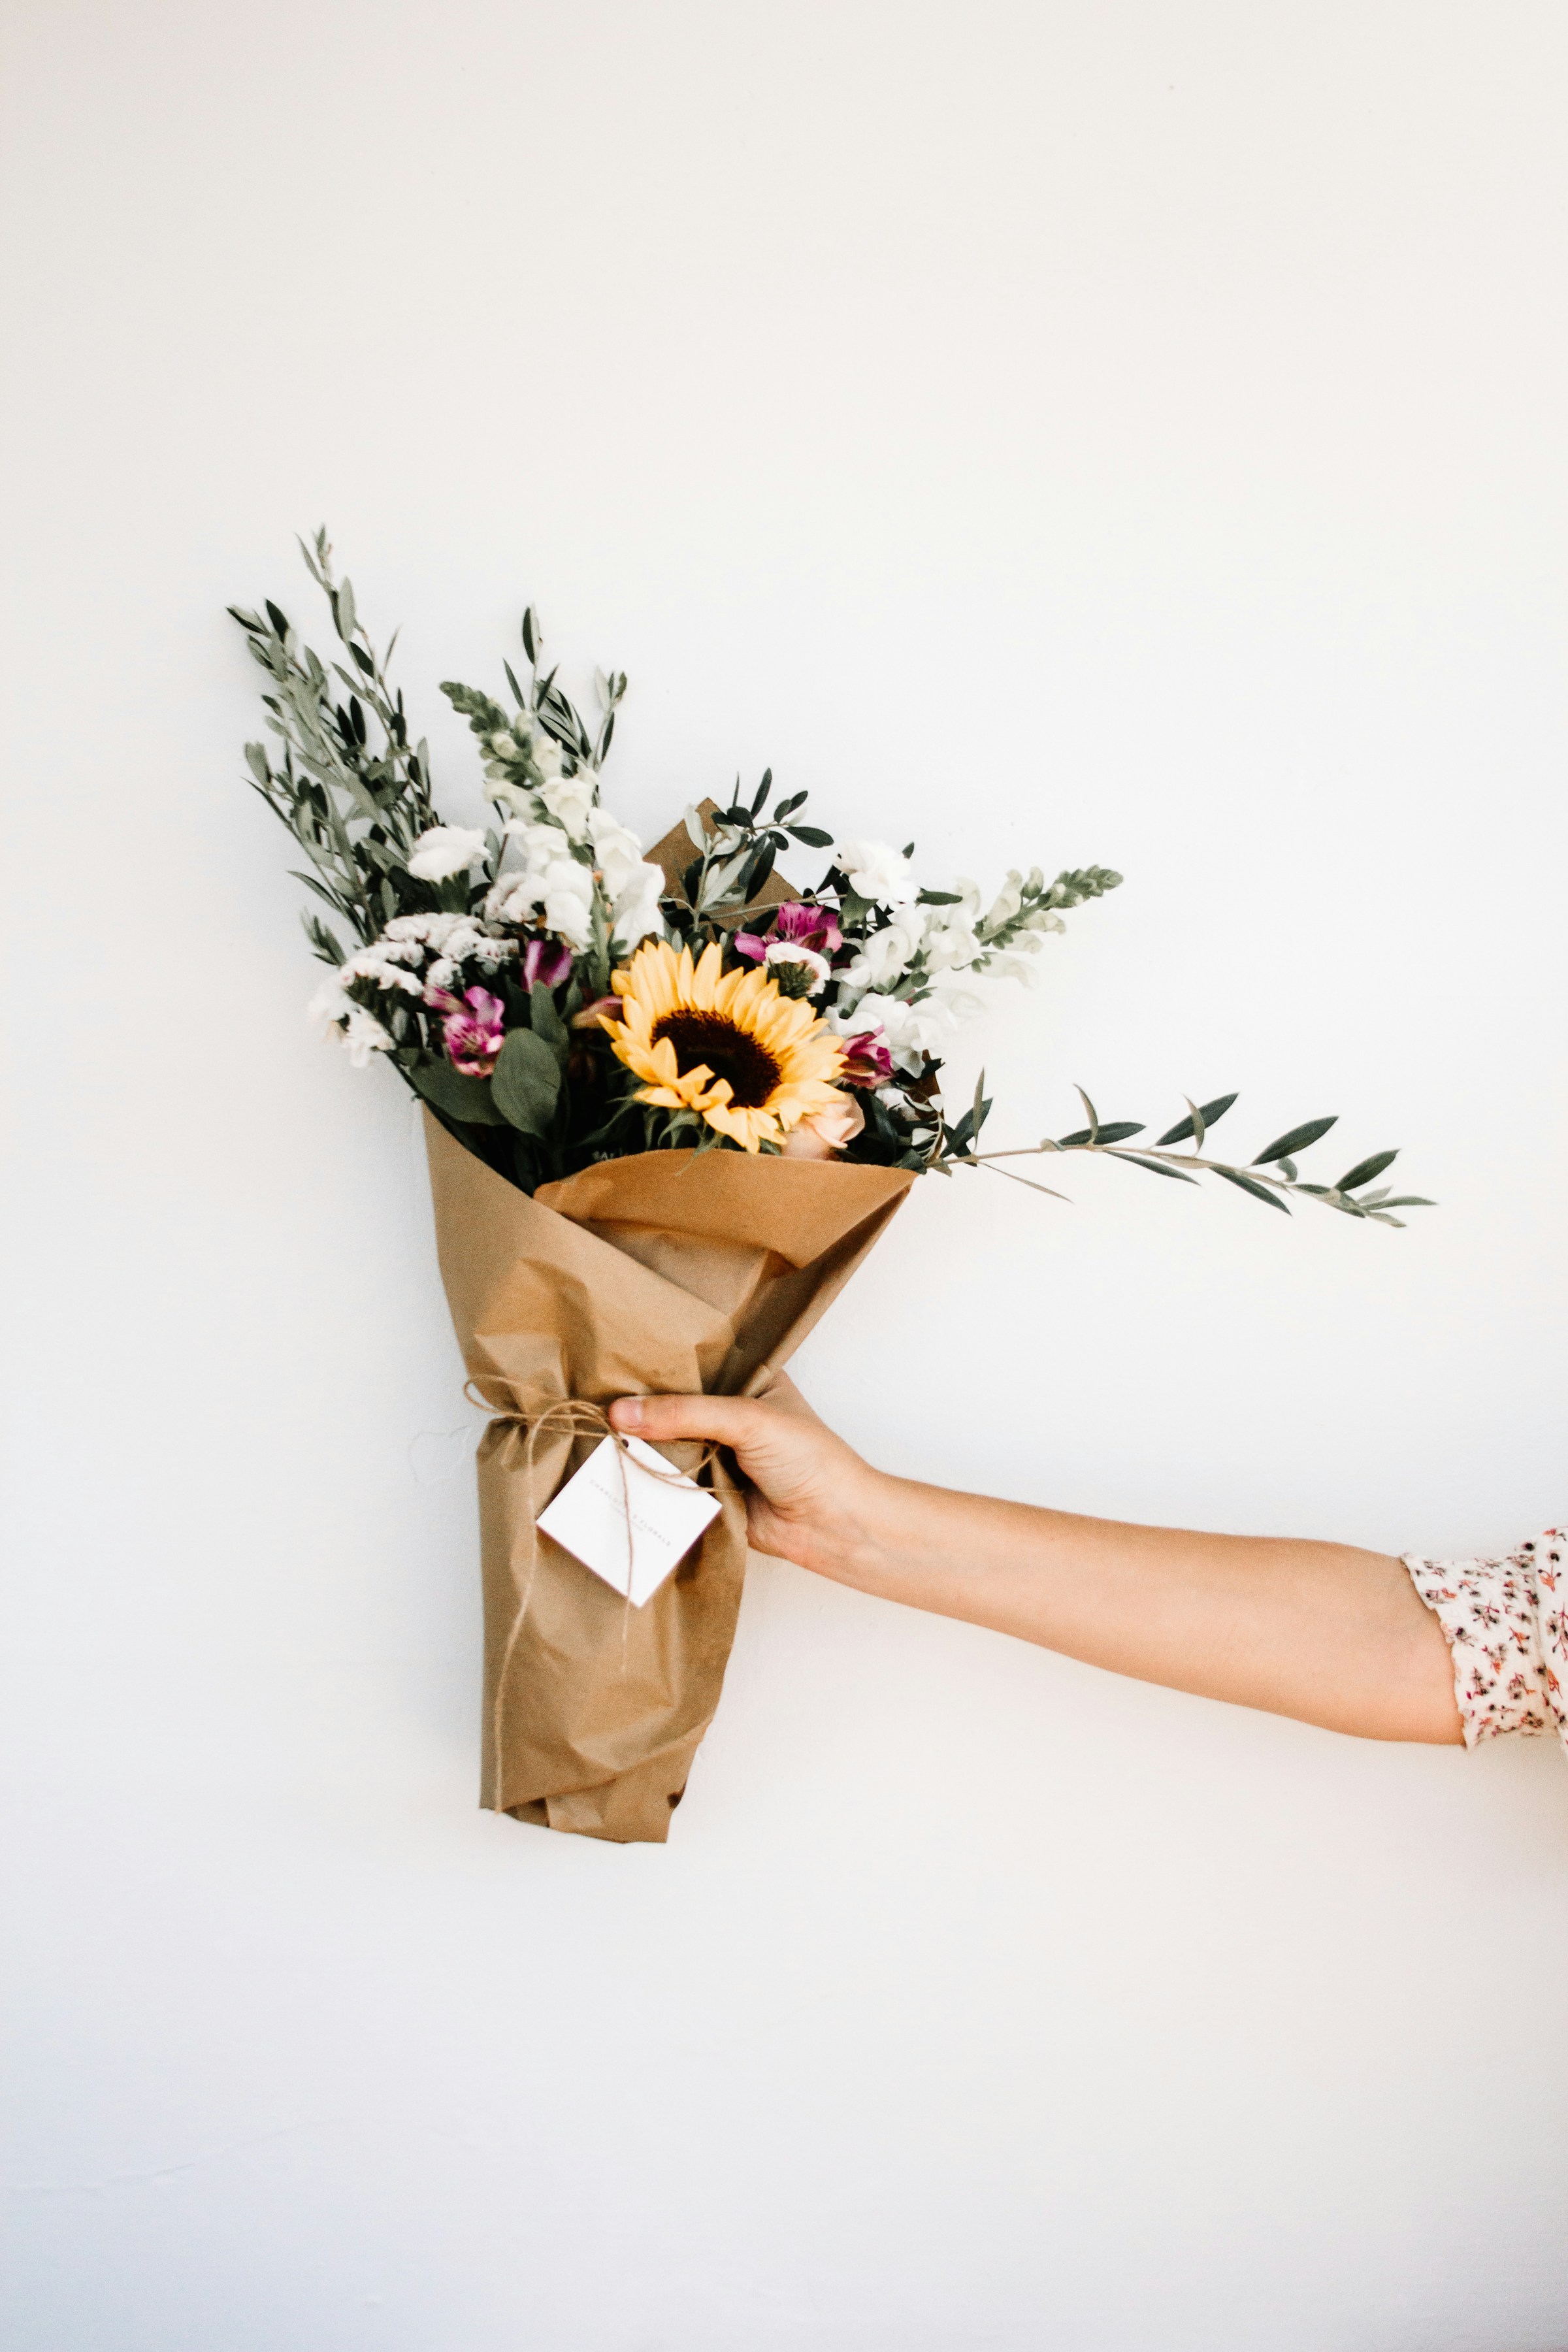 A person holding a bouquet of flowers | Source: Unsplash